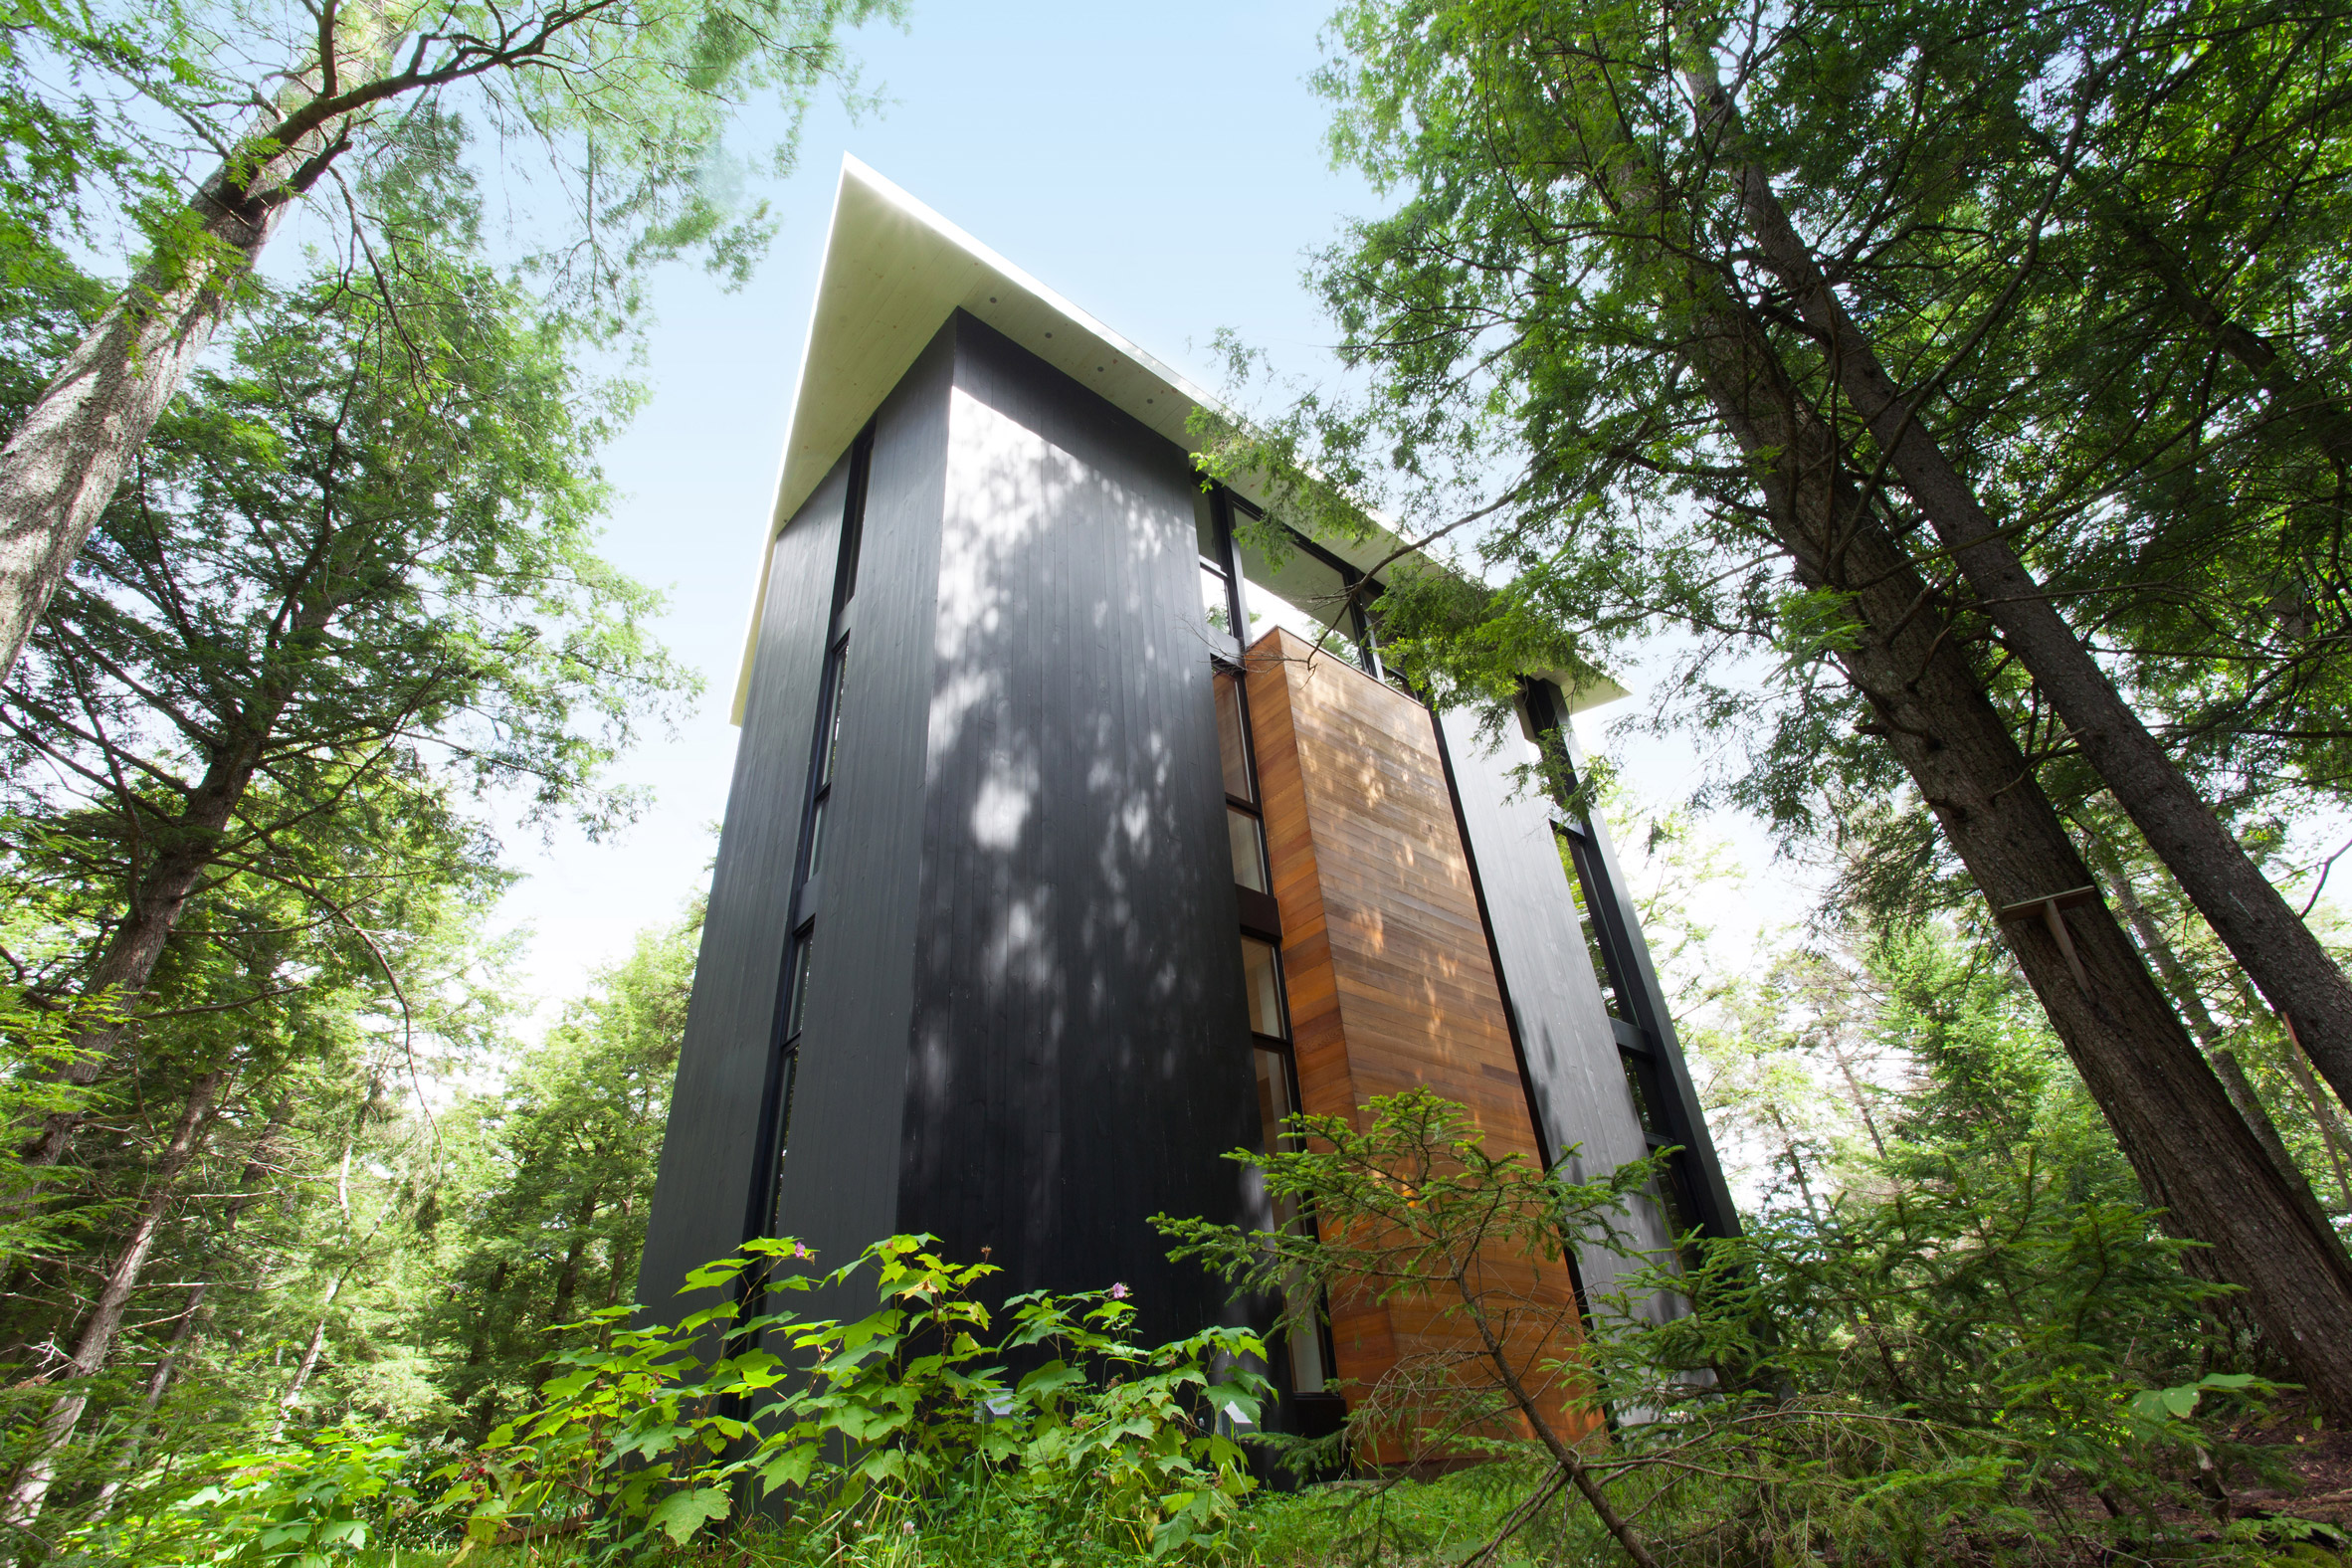 YH2 clads a Quebec holiday home for a sculptor in red cedar and blackened pine